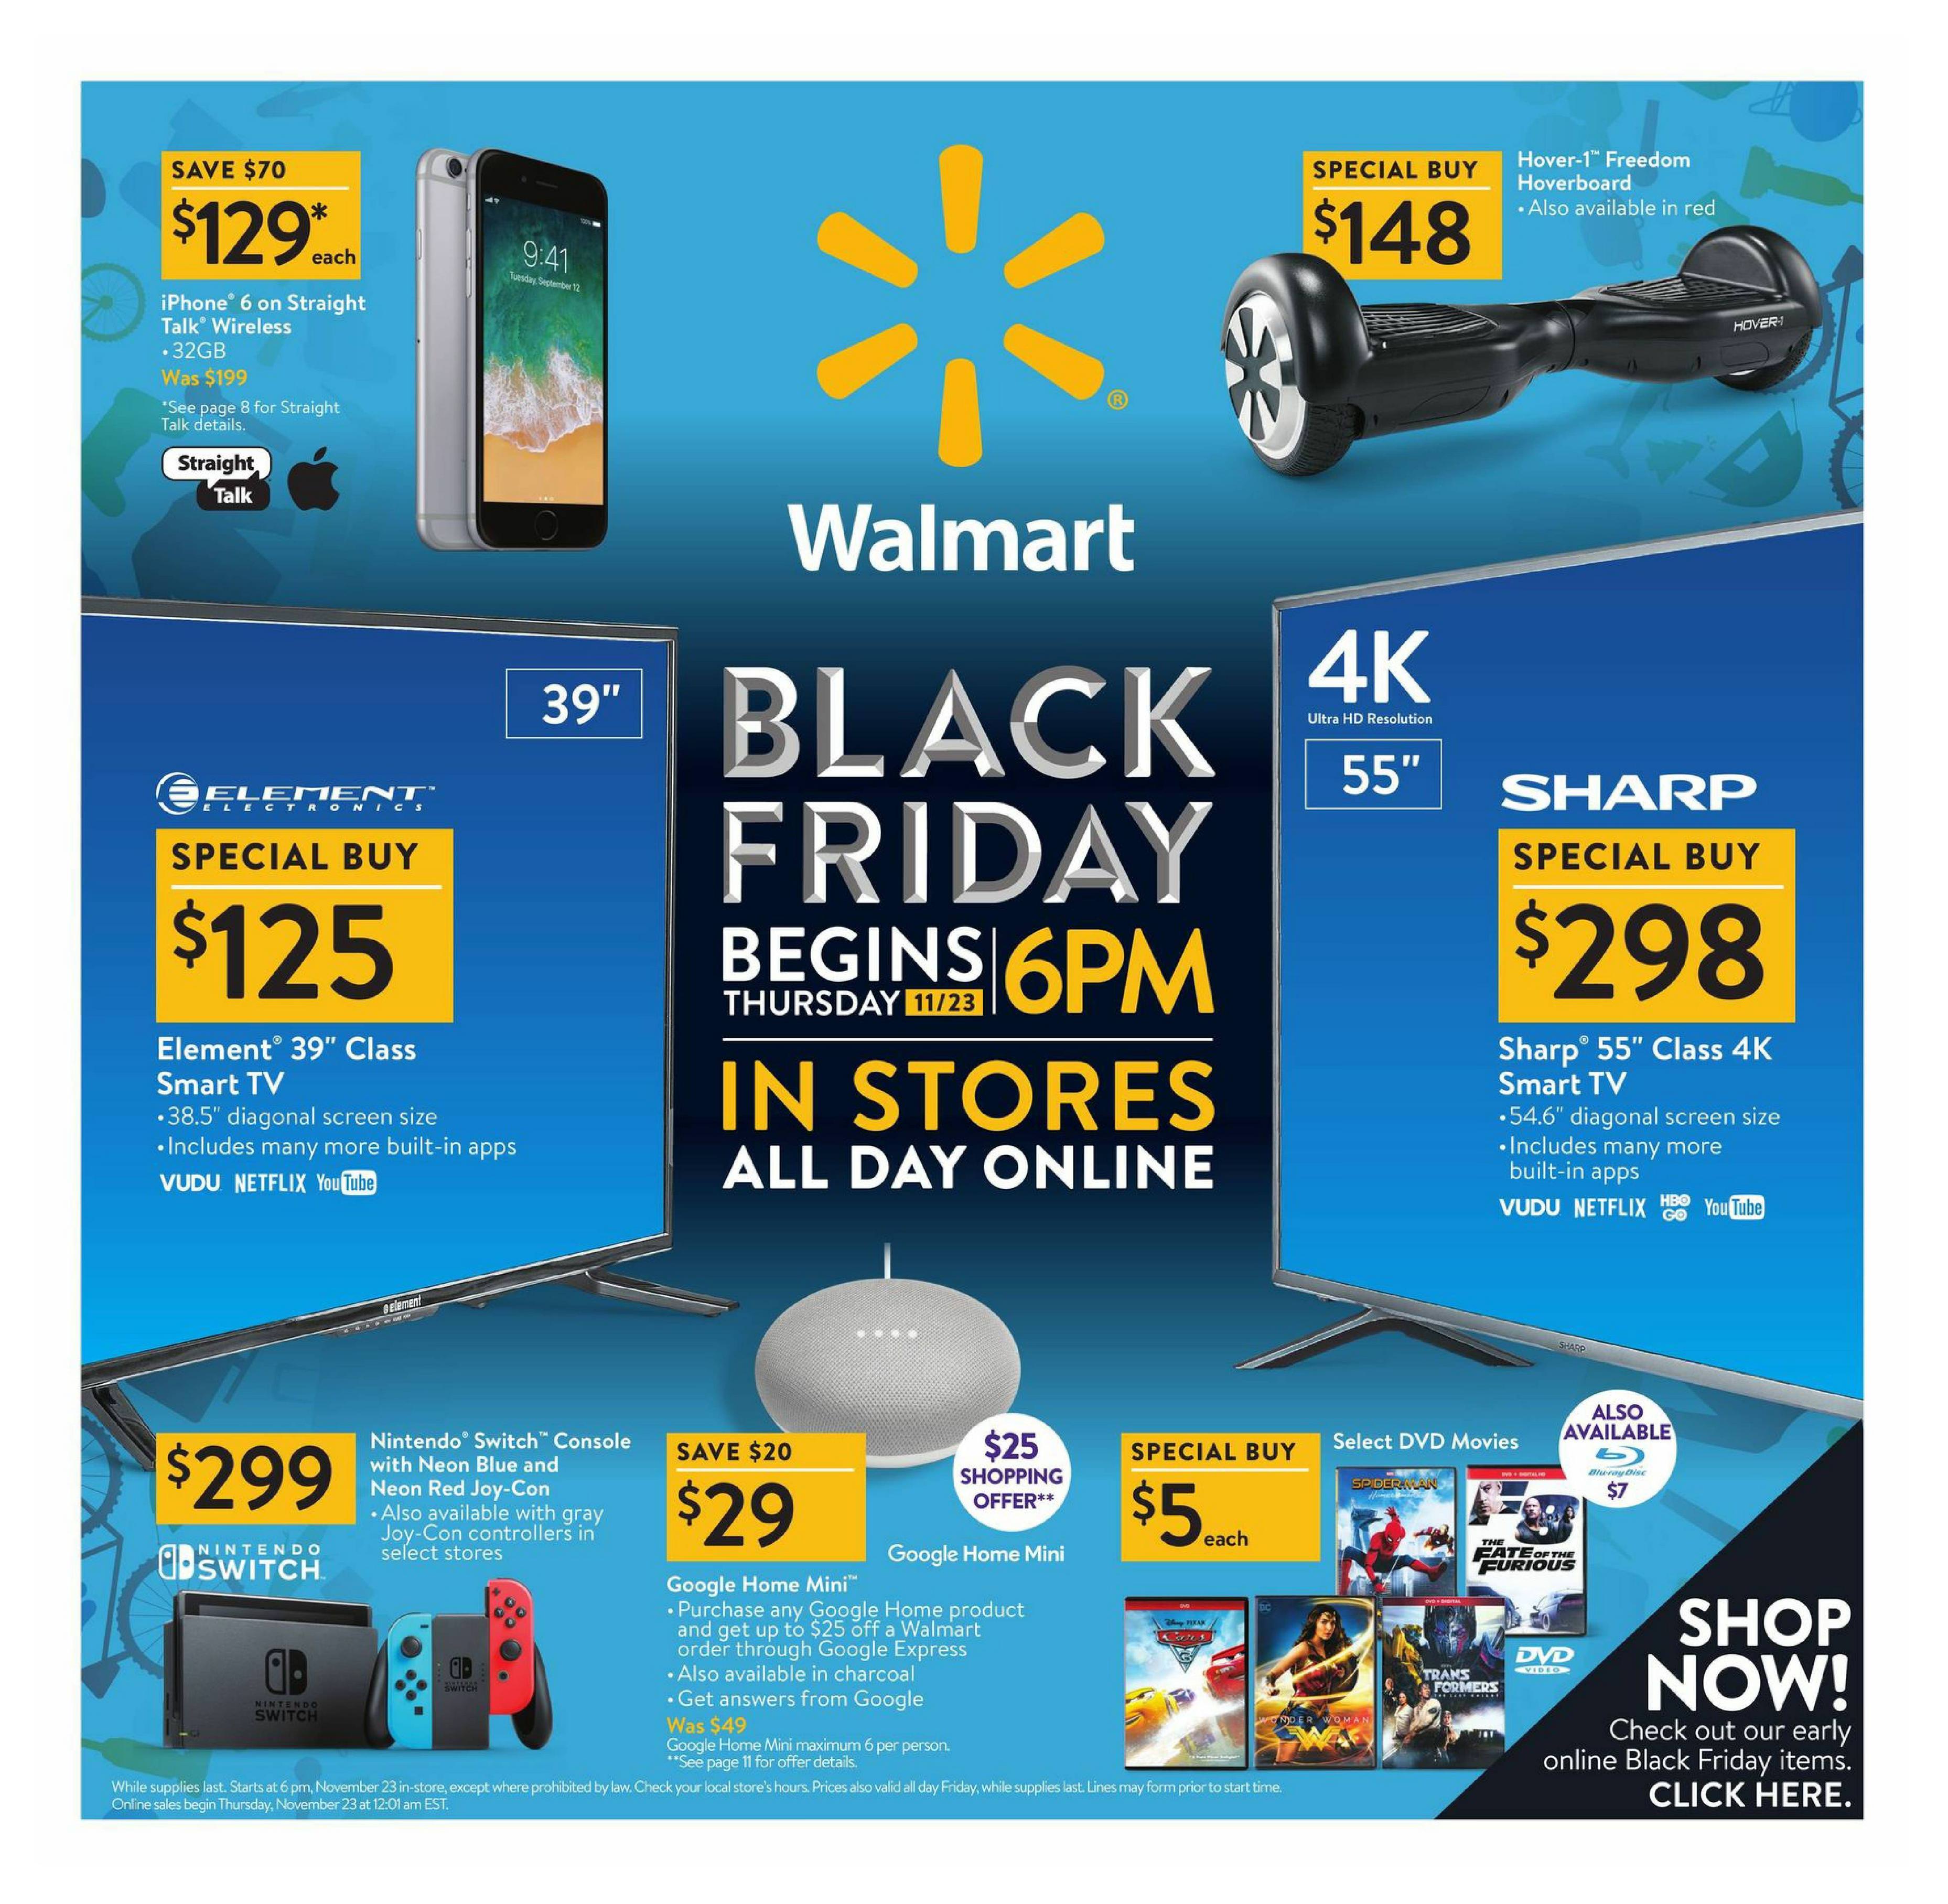 Switch appears on the front page of Walmart's Black Friday flyer.